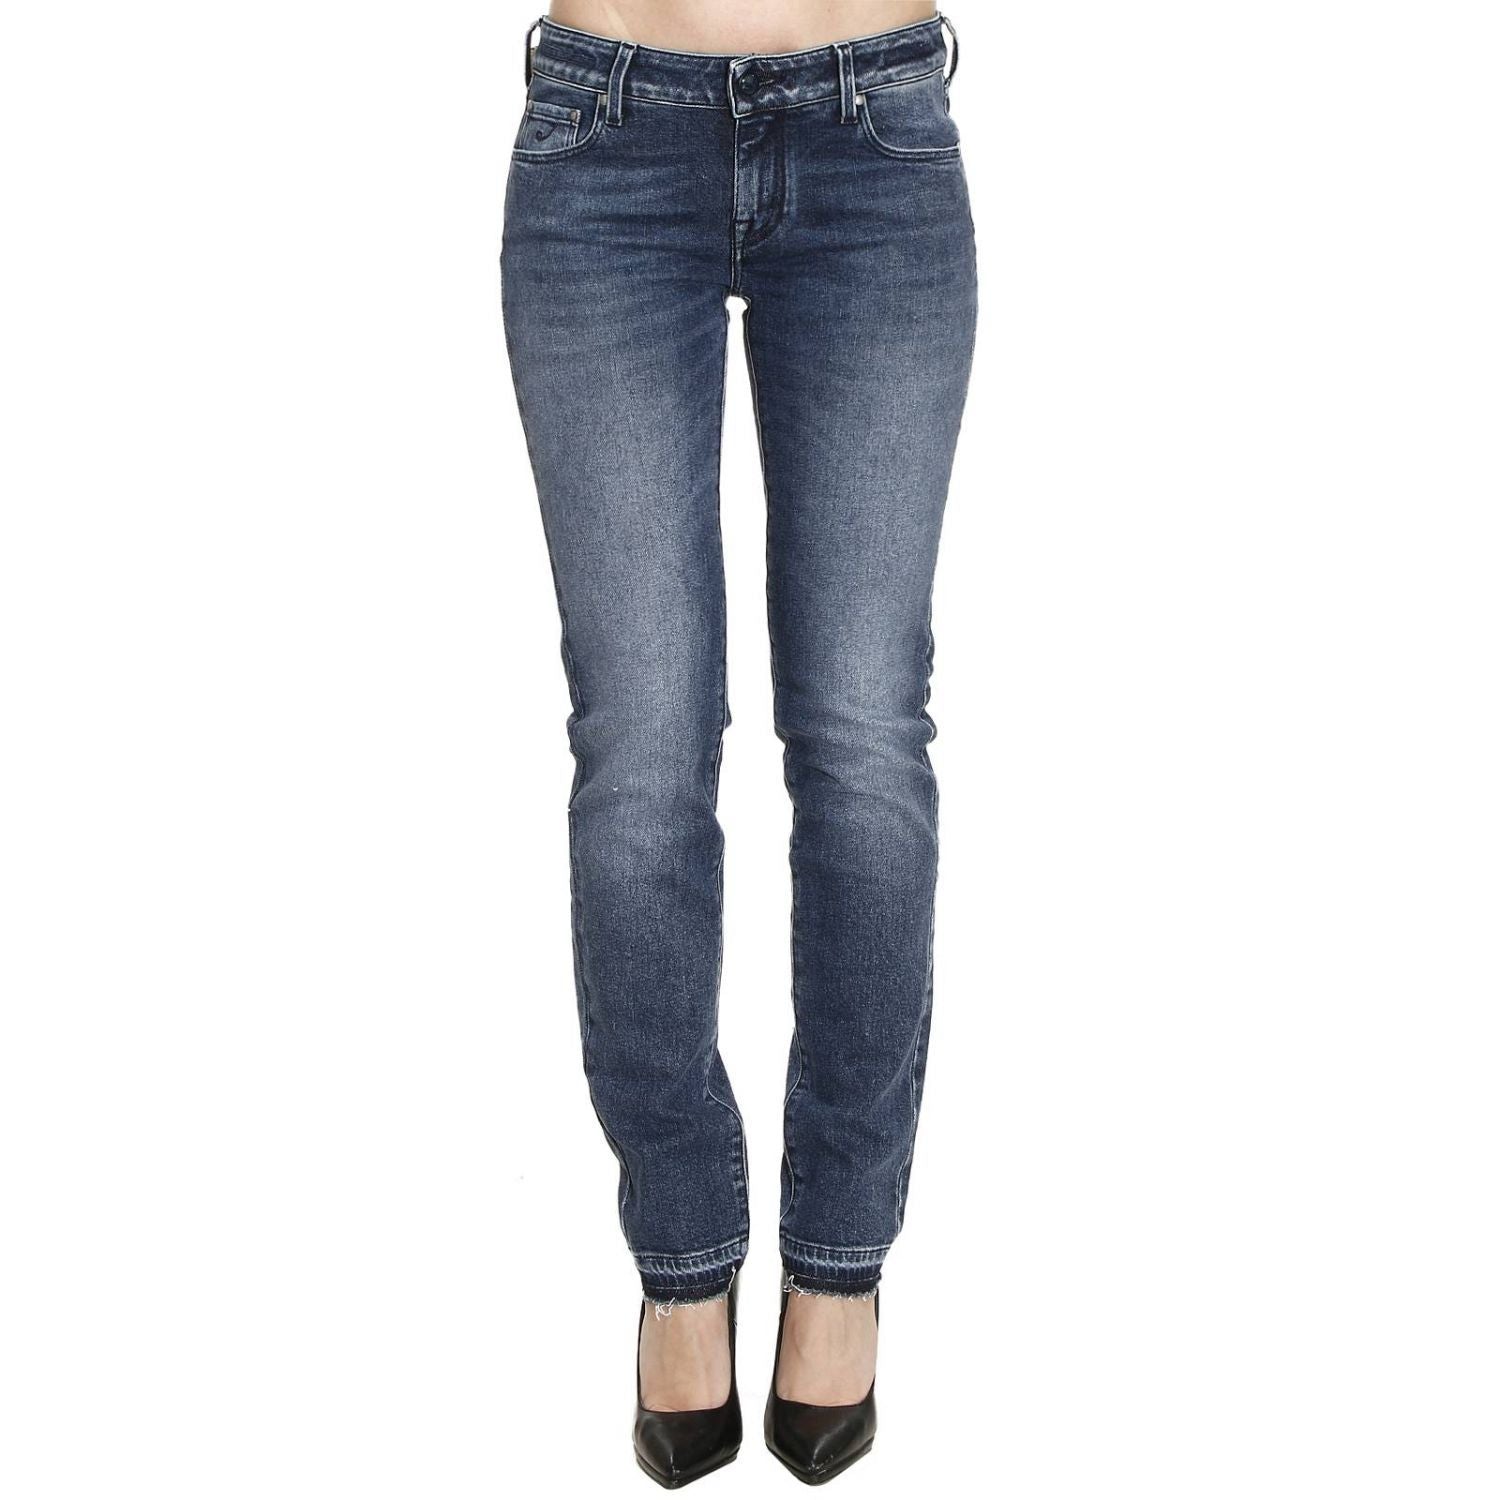 Chic Slim Fit Cotton Jeans with Artisanal Flair